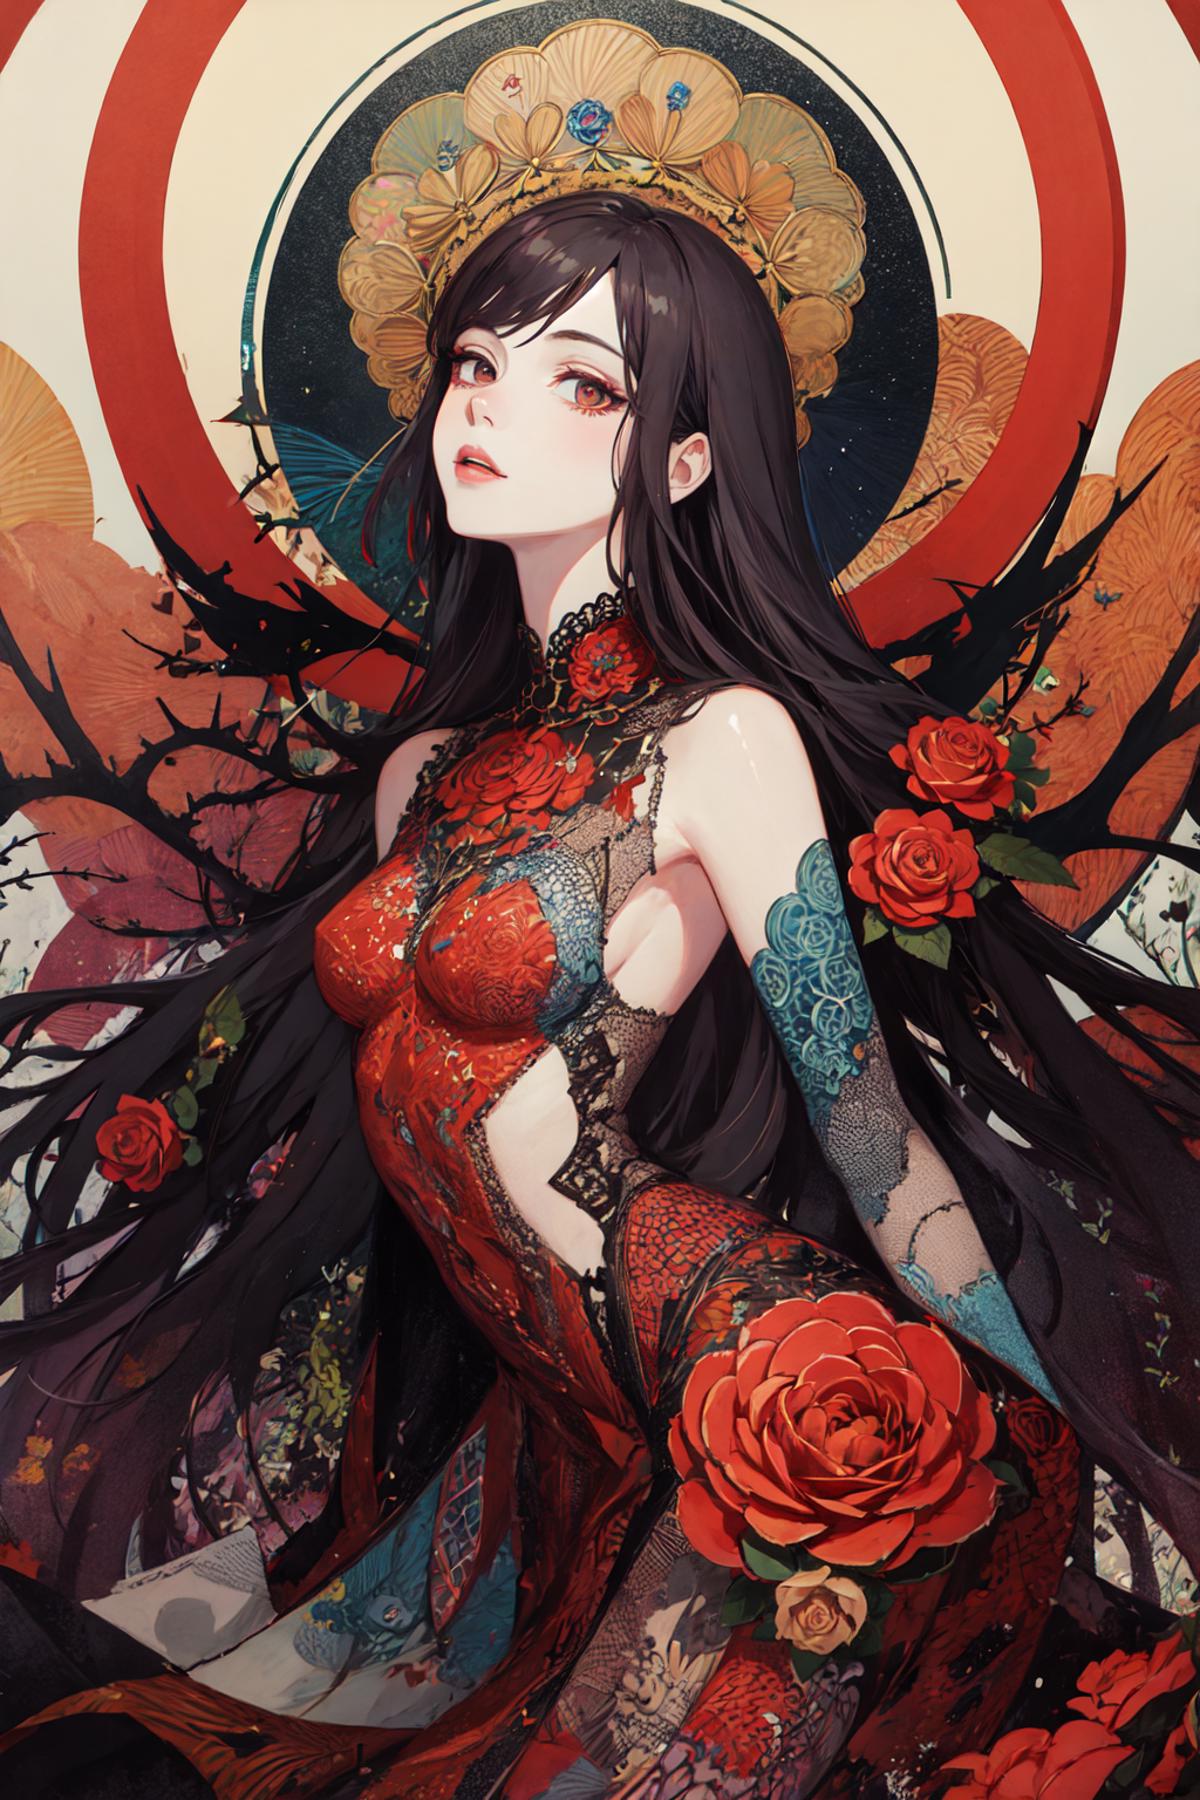 Anime girl in a red dress with roses on her arm and face.